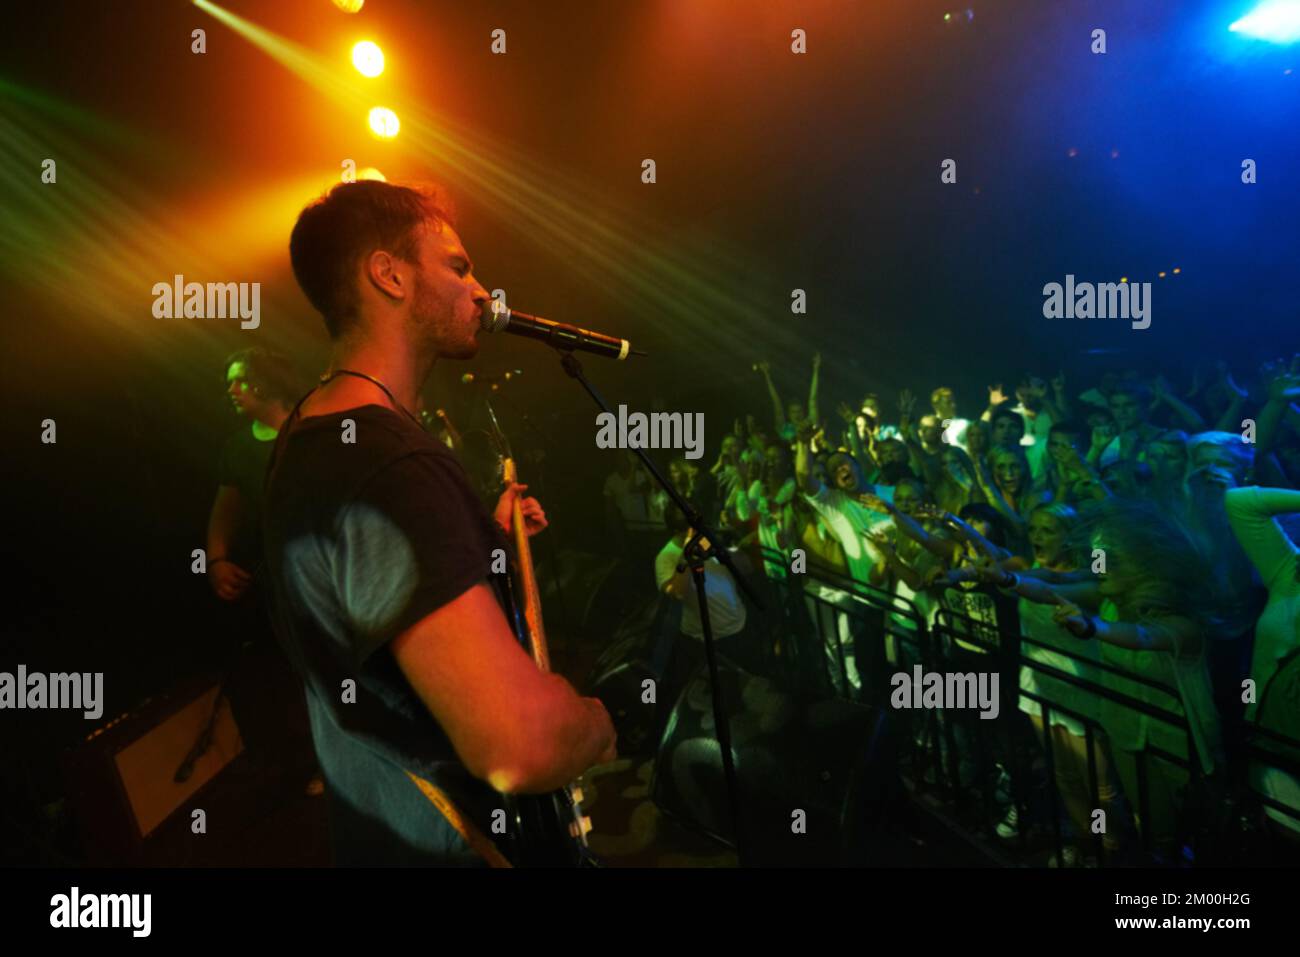 Concert, band and music with a man guitarist playing at a gig for a crowd or audience at a performance event. Festival, stage and social with a male Stock Photo